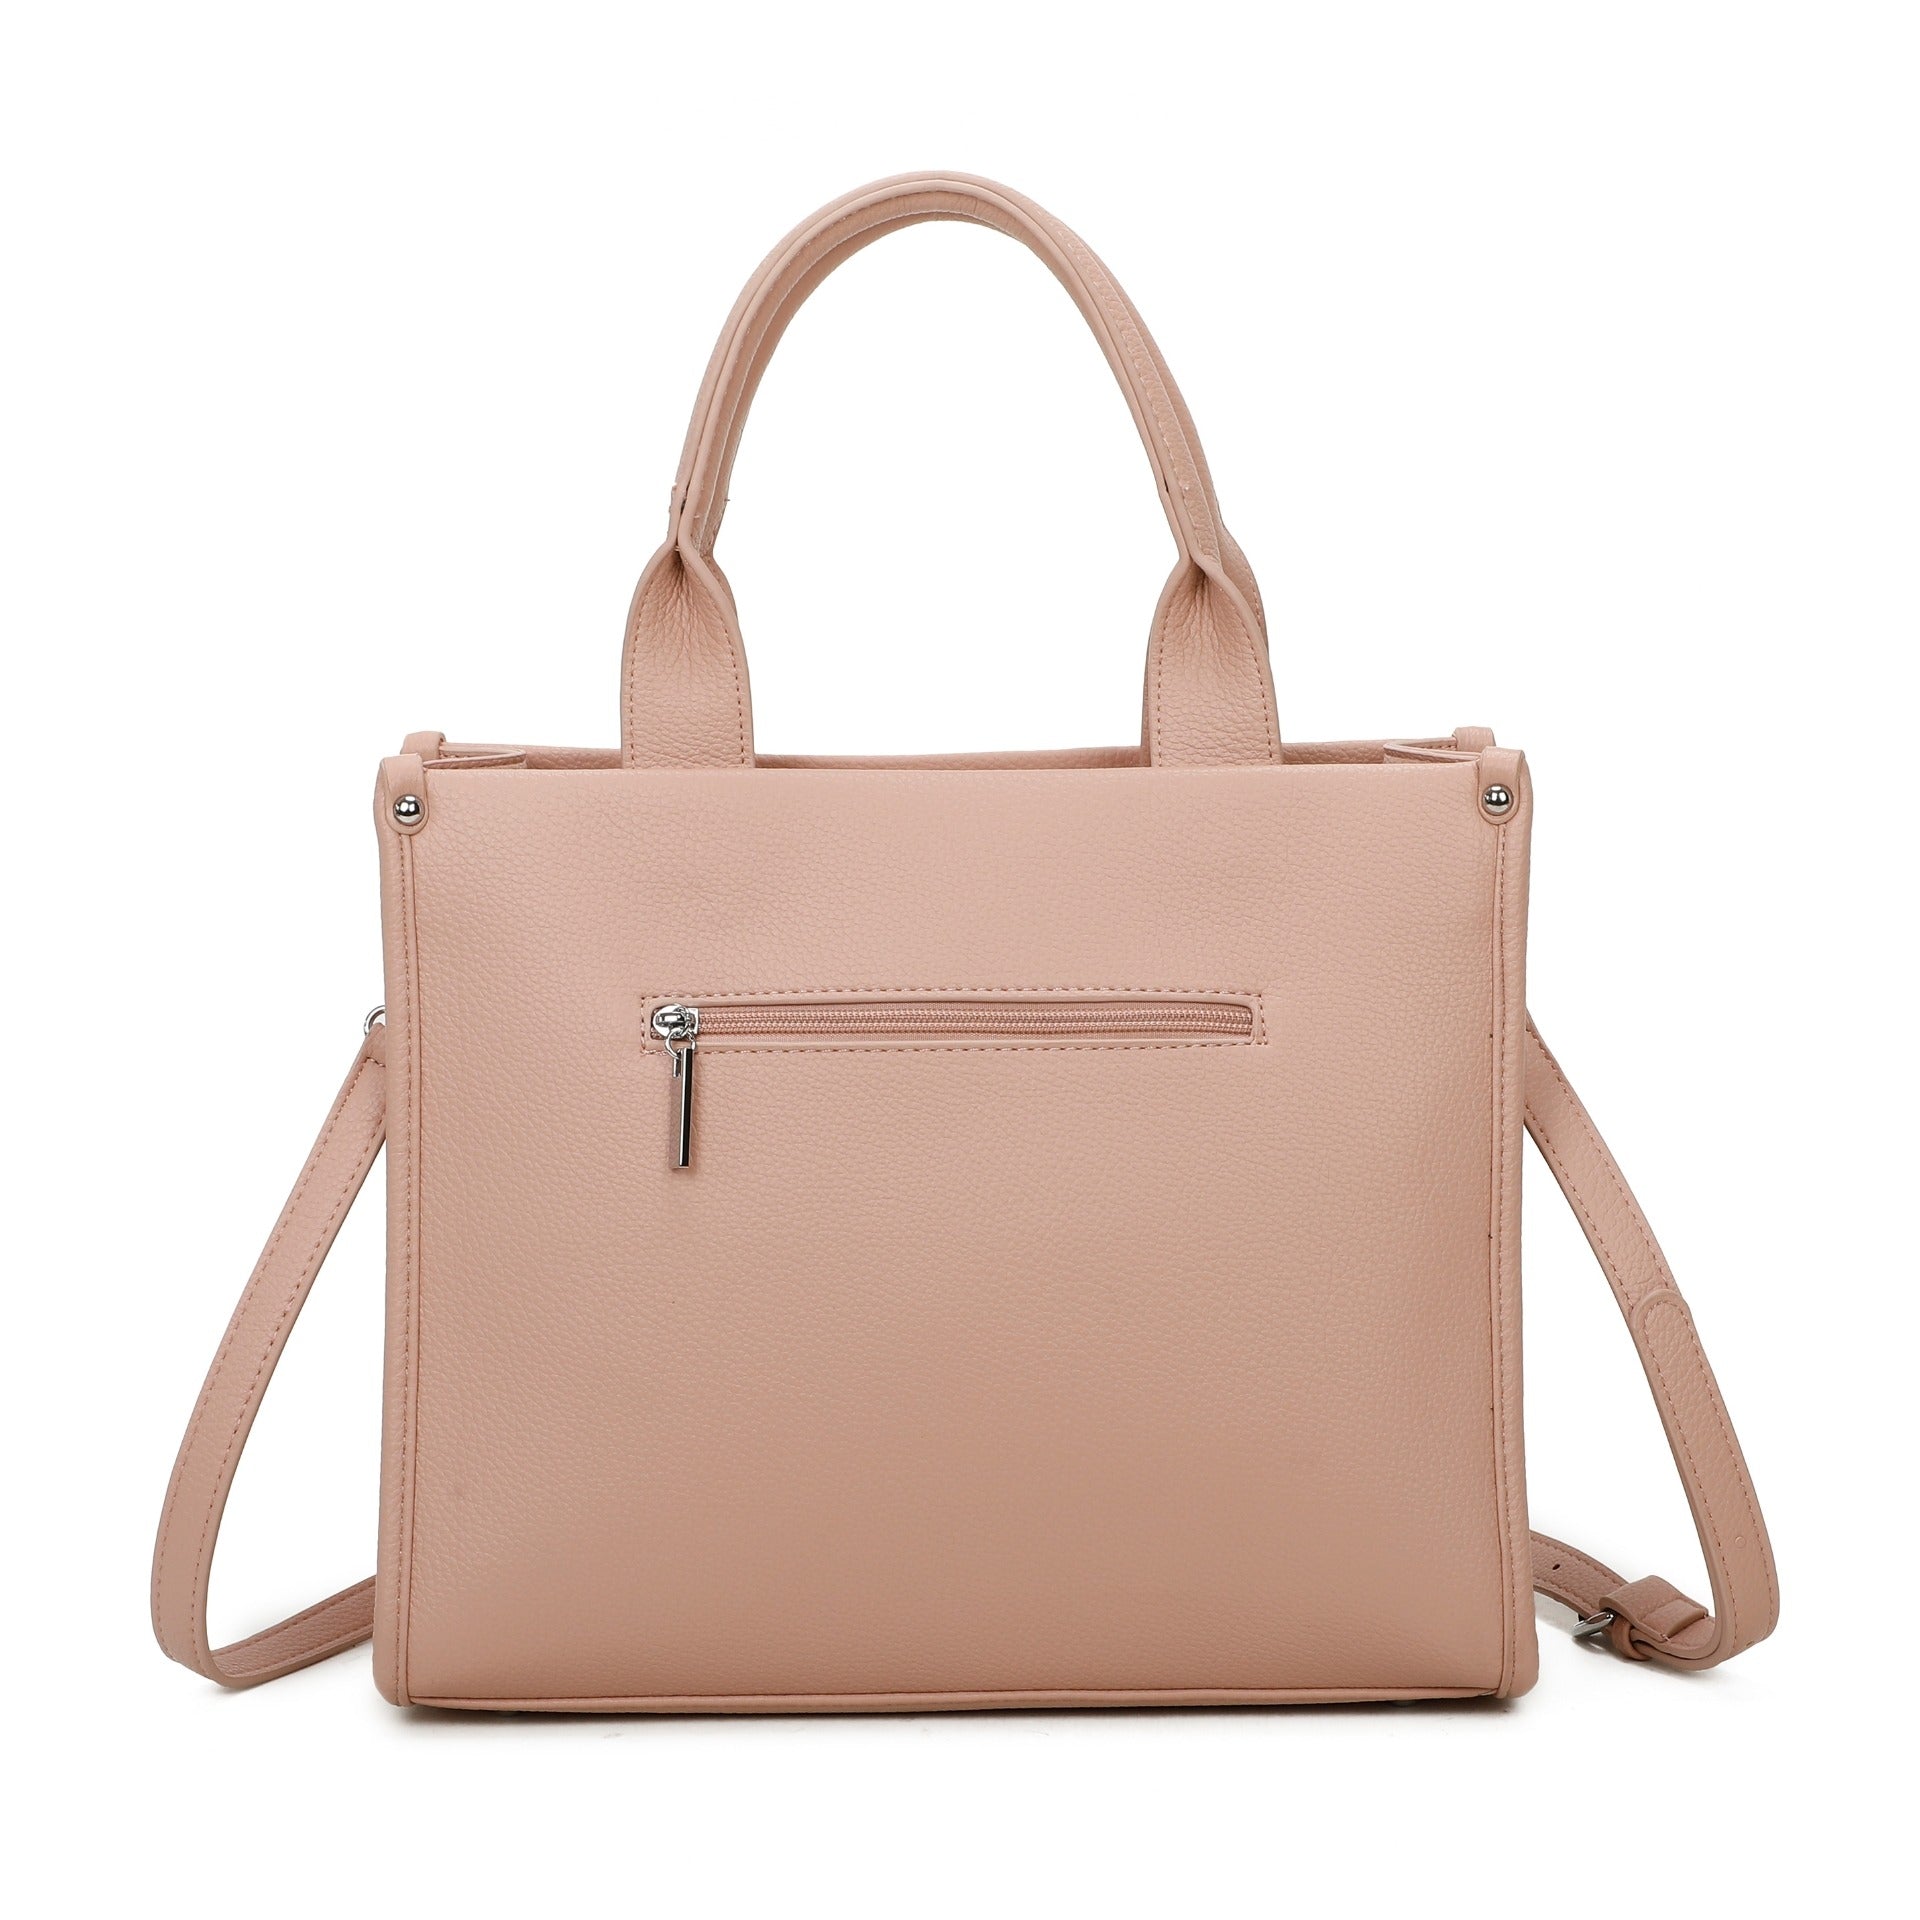 Craze London Synthetic Tote Bag with Internal Zip Pocket